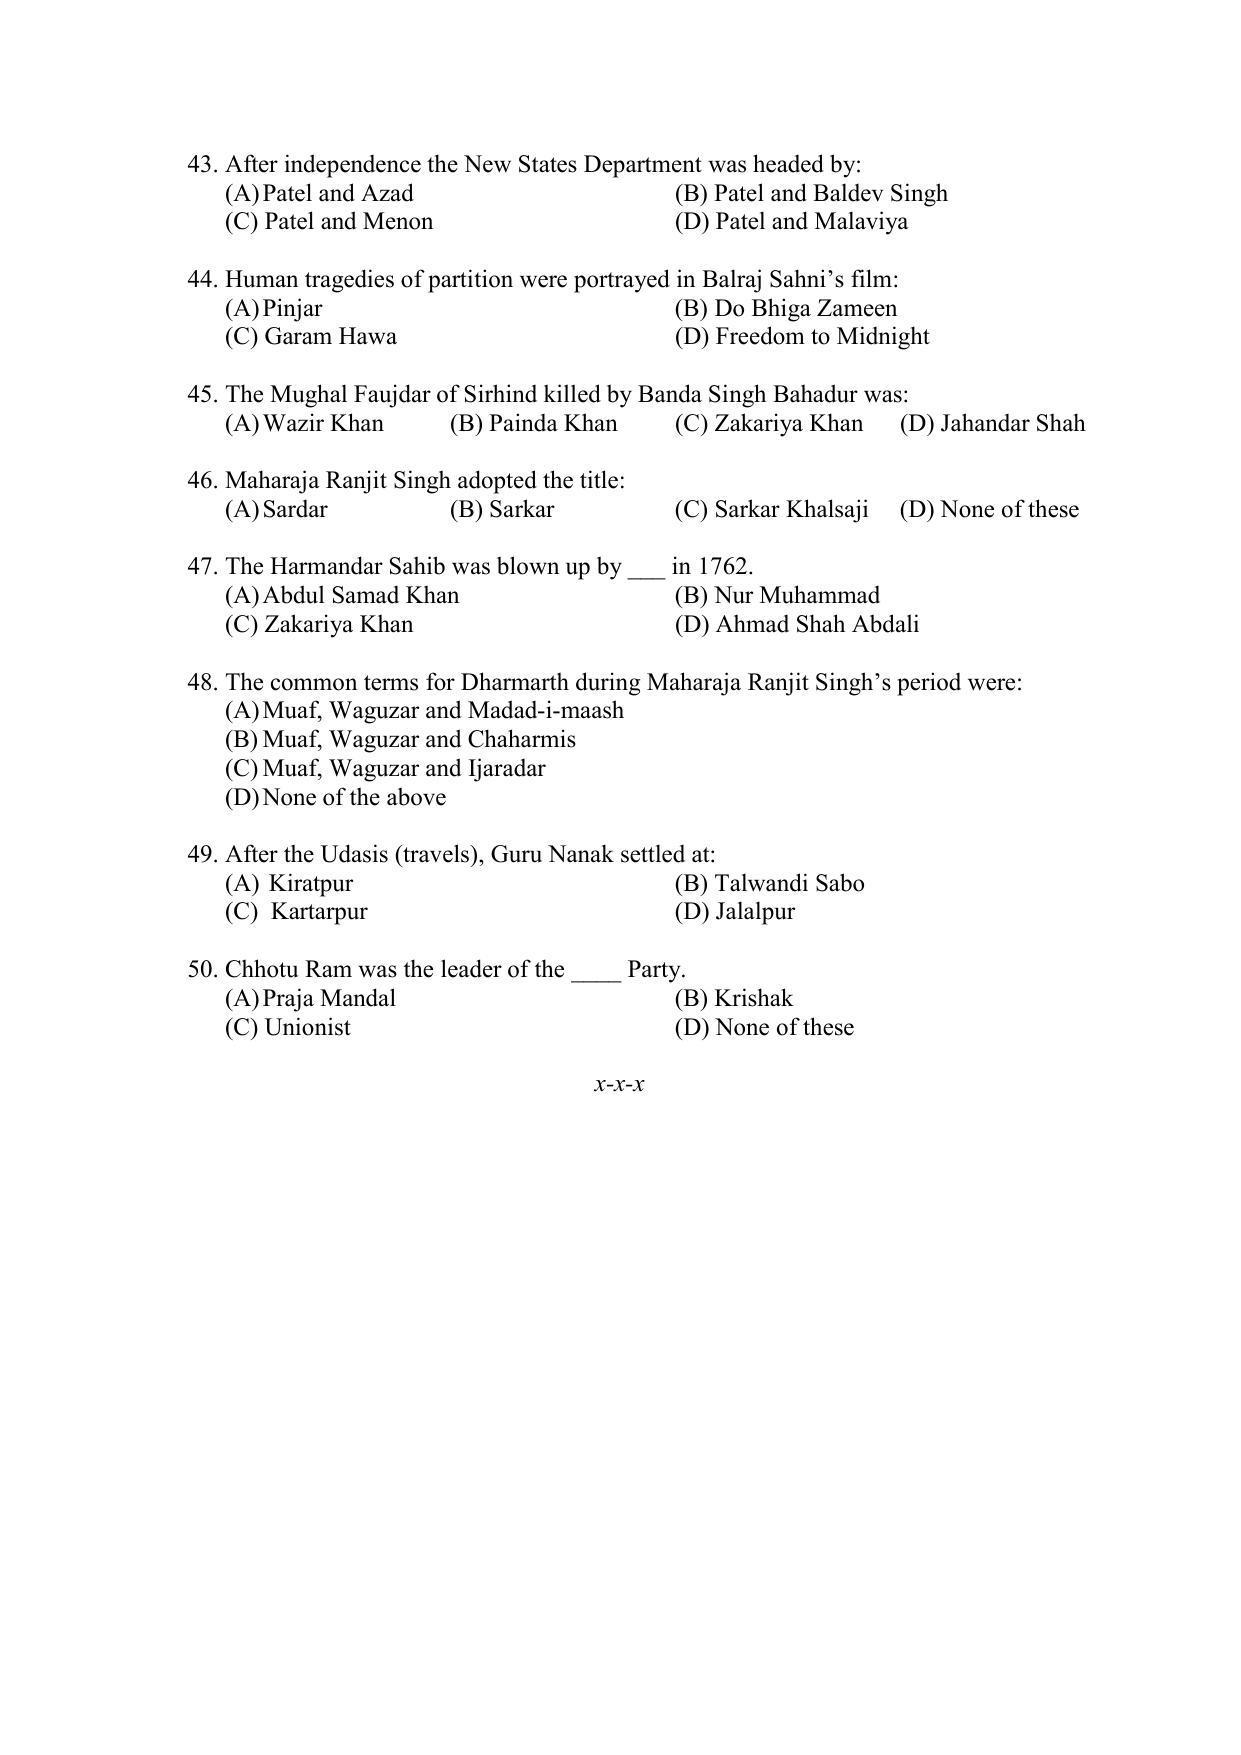 PU MPET Ancient Indian History & Archeology 2022 Question Papers - Page 21